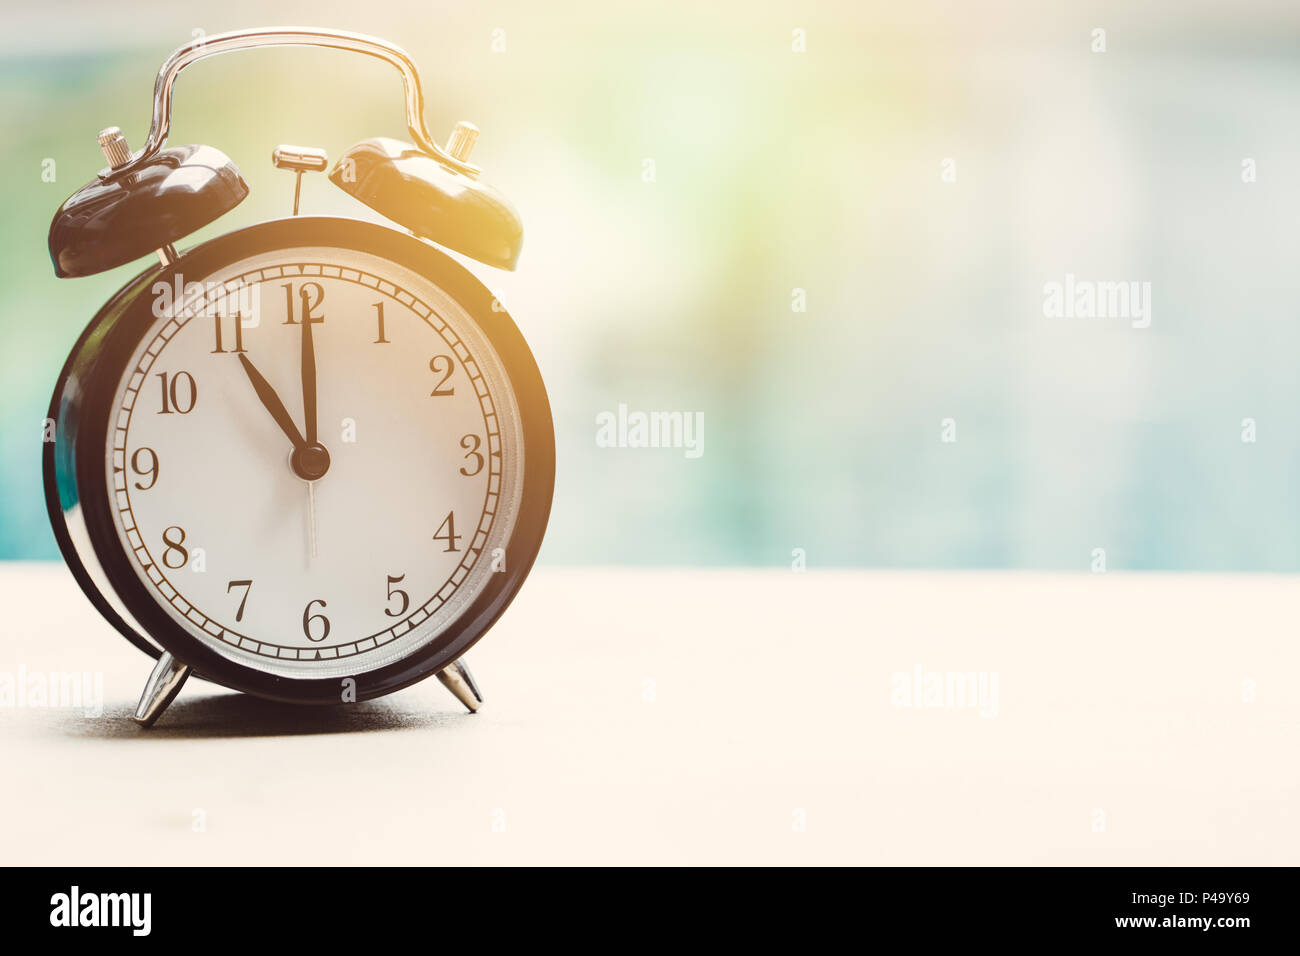 11 o'clock retro clock at the swimming pool outdoor relax time holiday time concept. Stock Photo